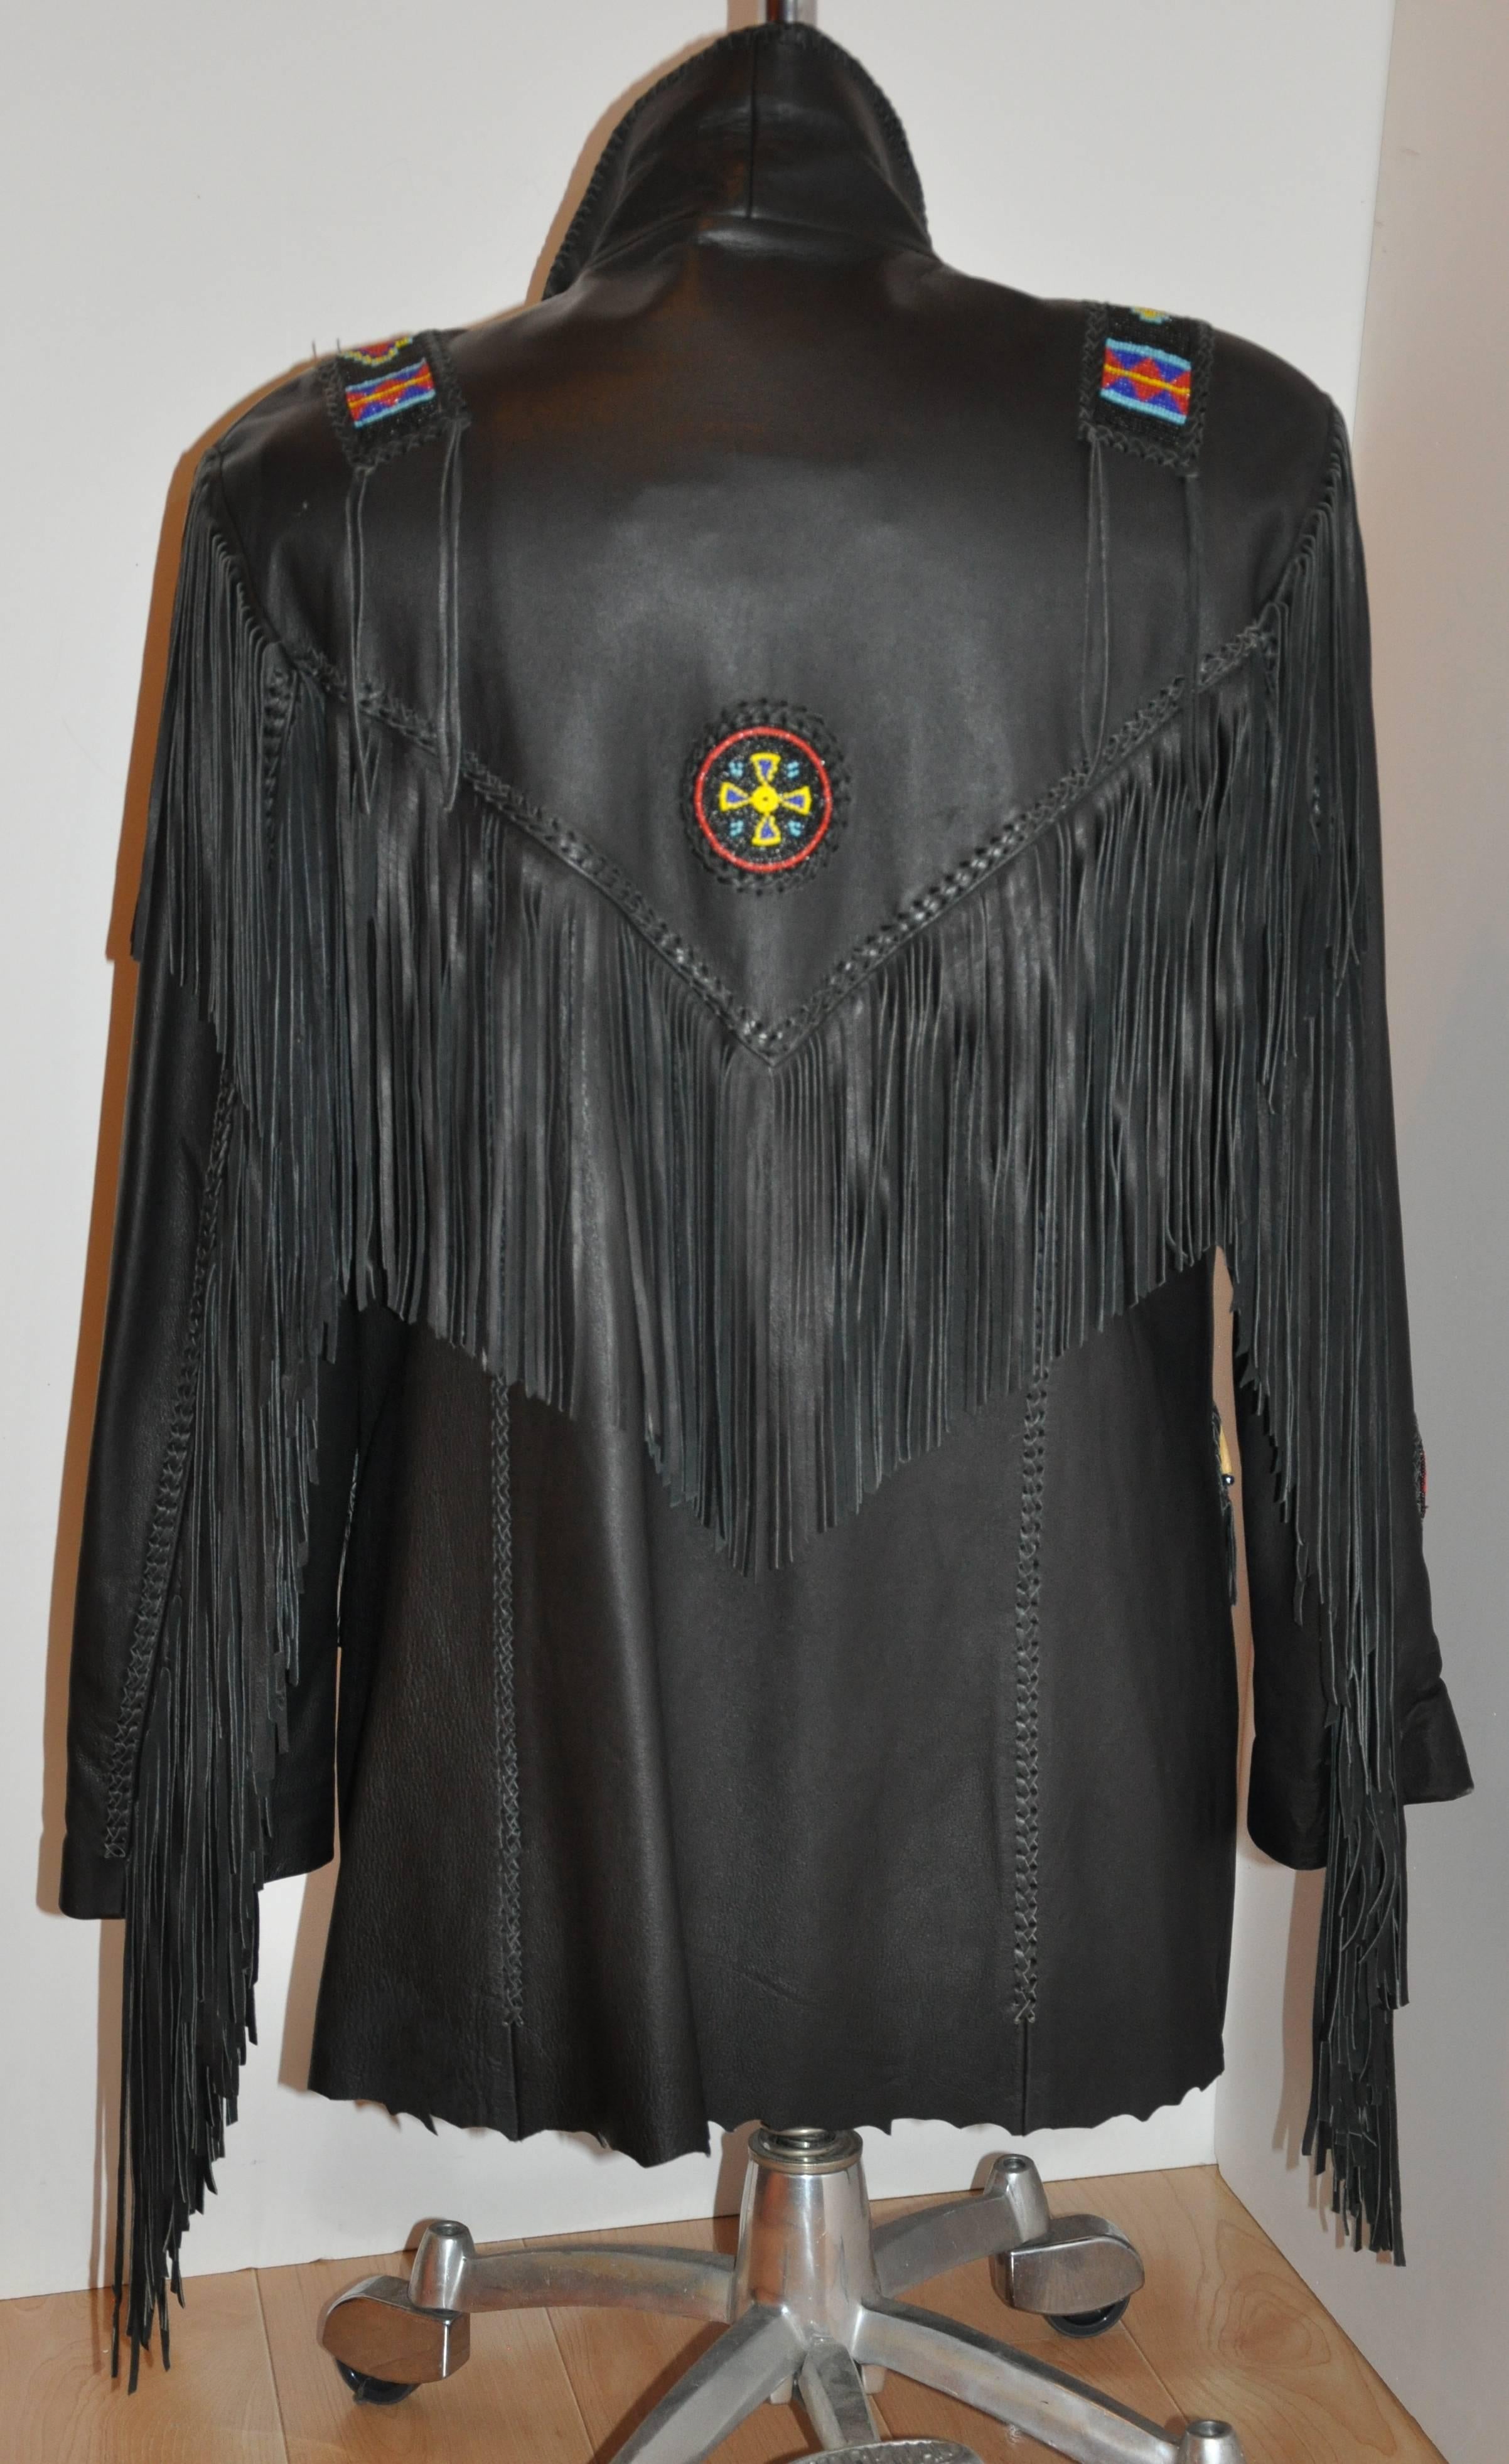         Michael Alle's wonderfully detailed hand-made men's western-style black butter-soft chamois lambskin fully-lined jacket has such detailing as detailed hand-done bead-work and hand-cut fringes. The front has two patch pockets with fringes